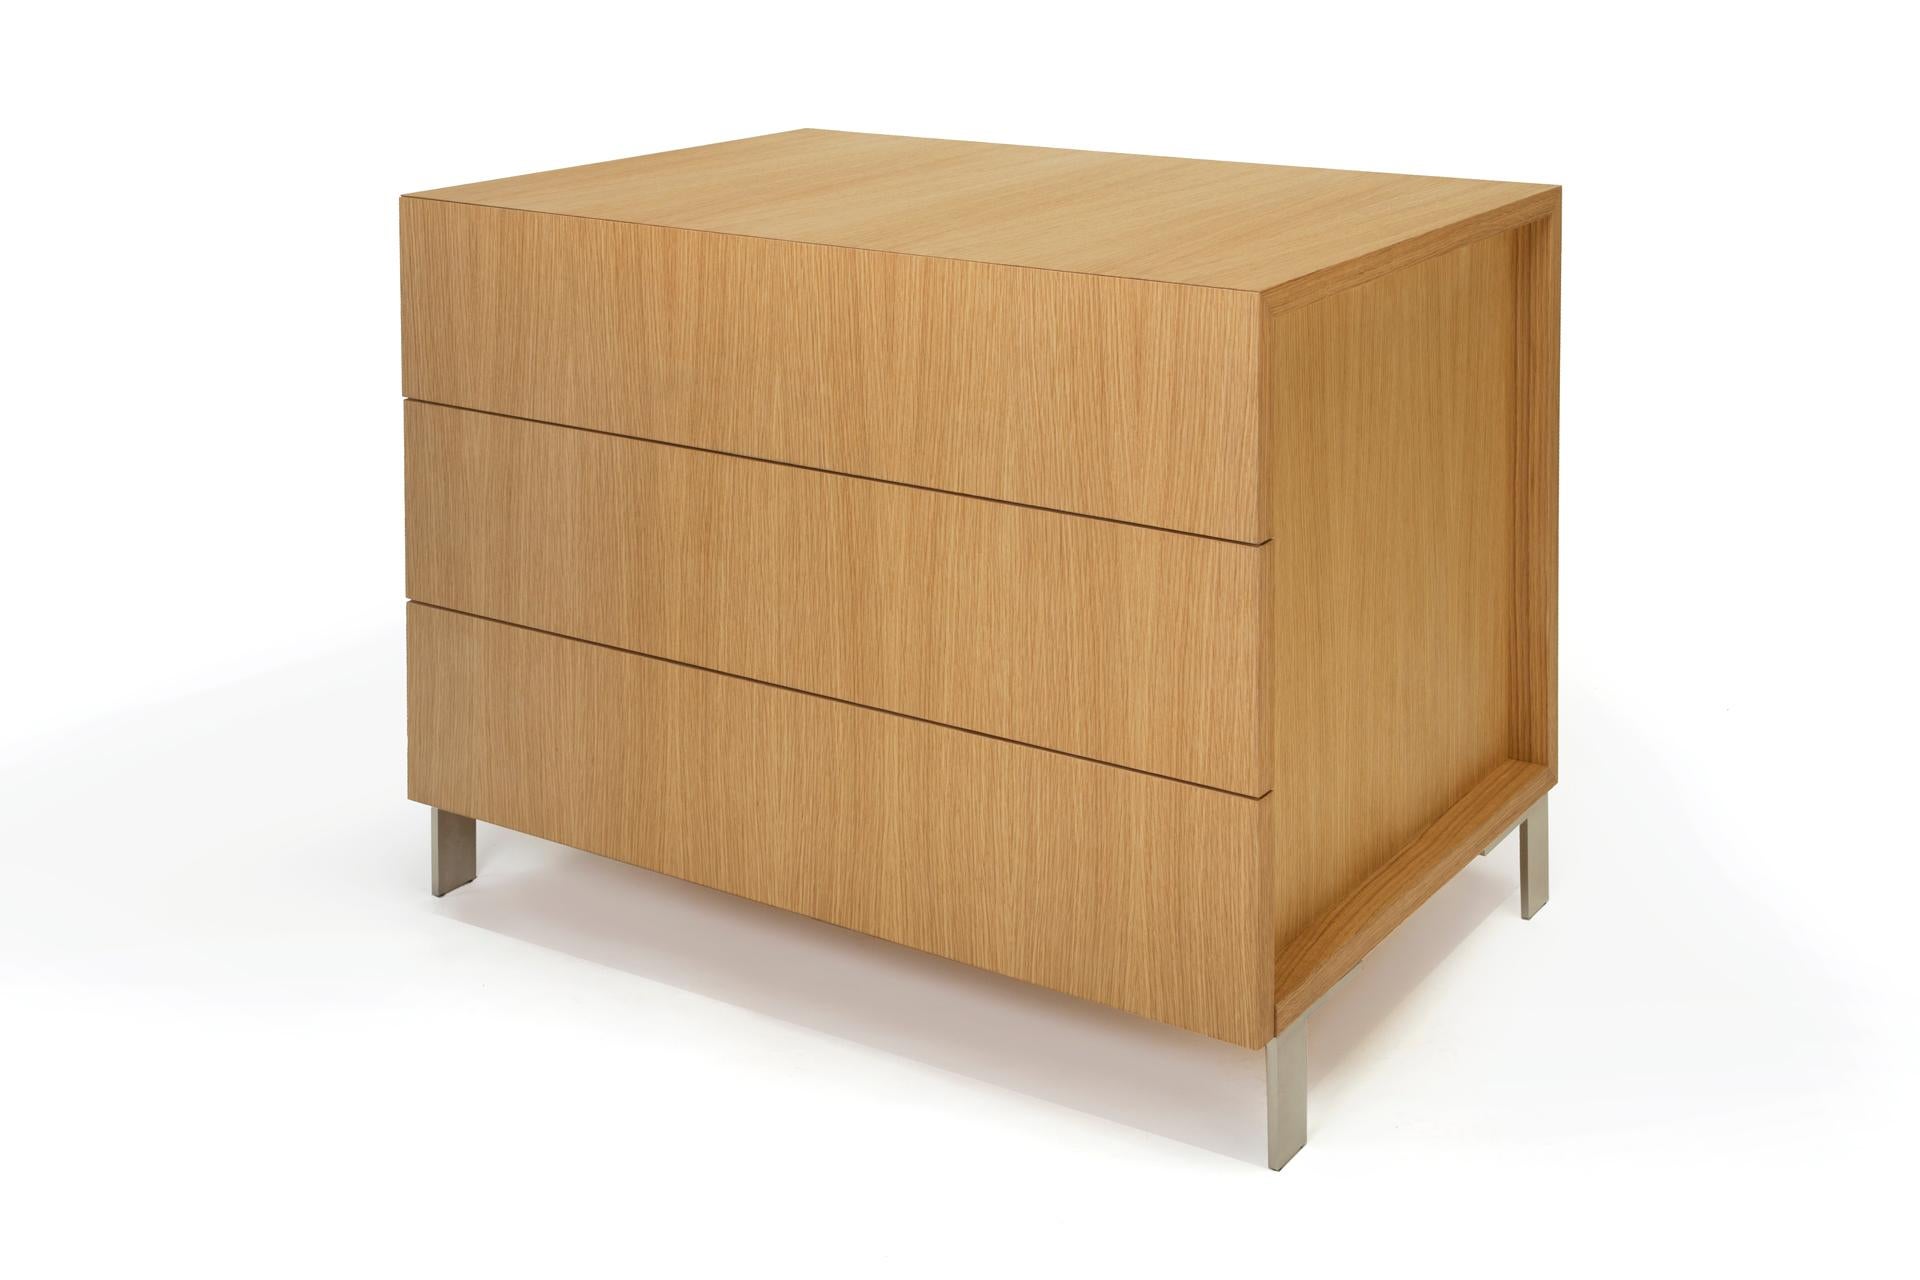 This version of our bureau series is called the 